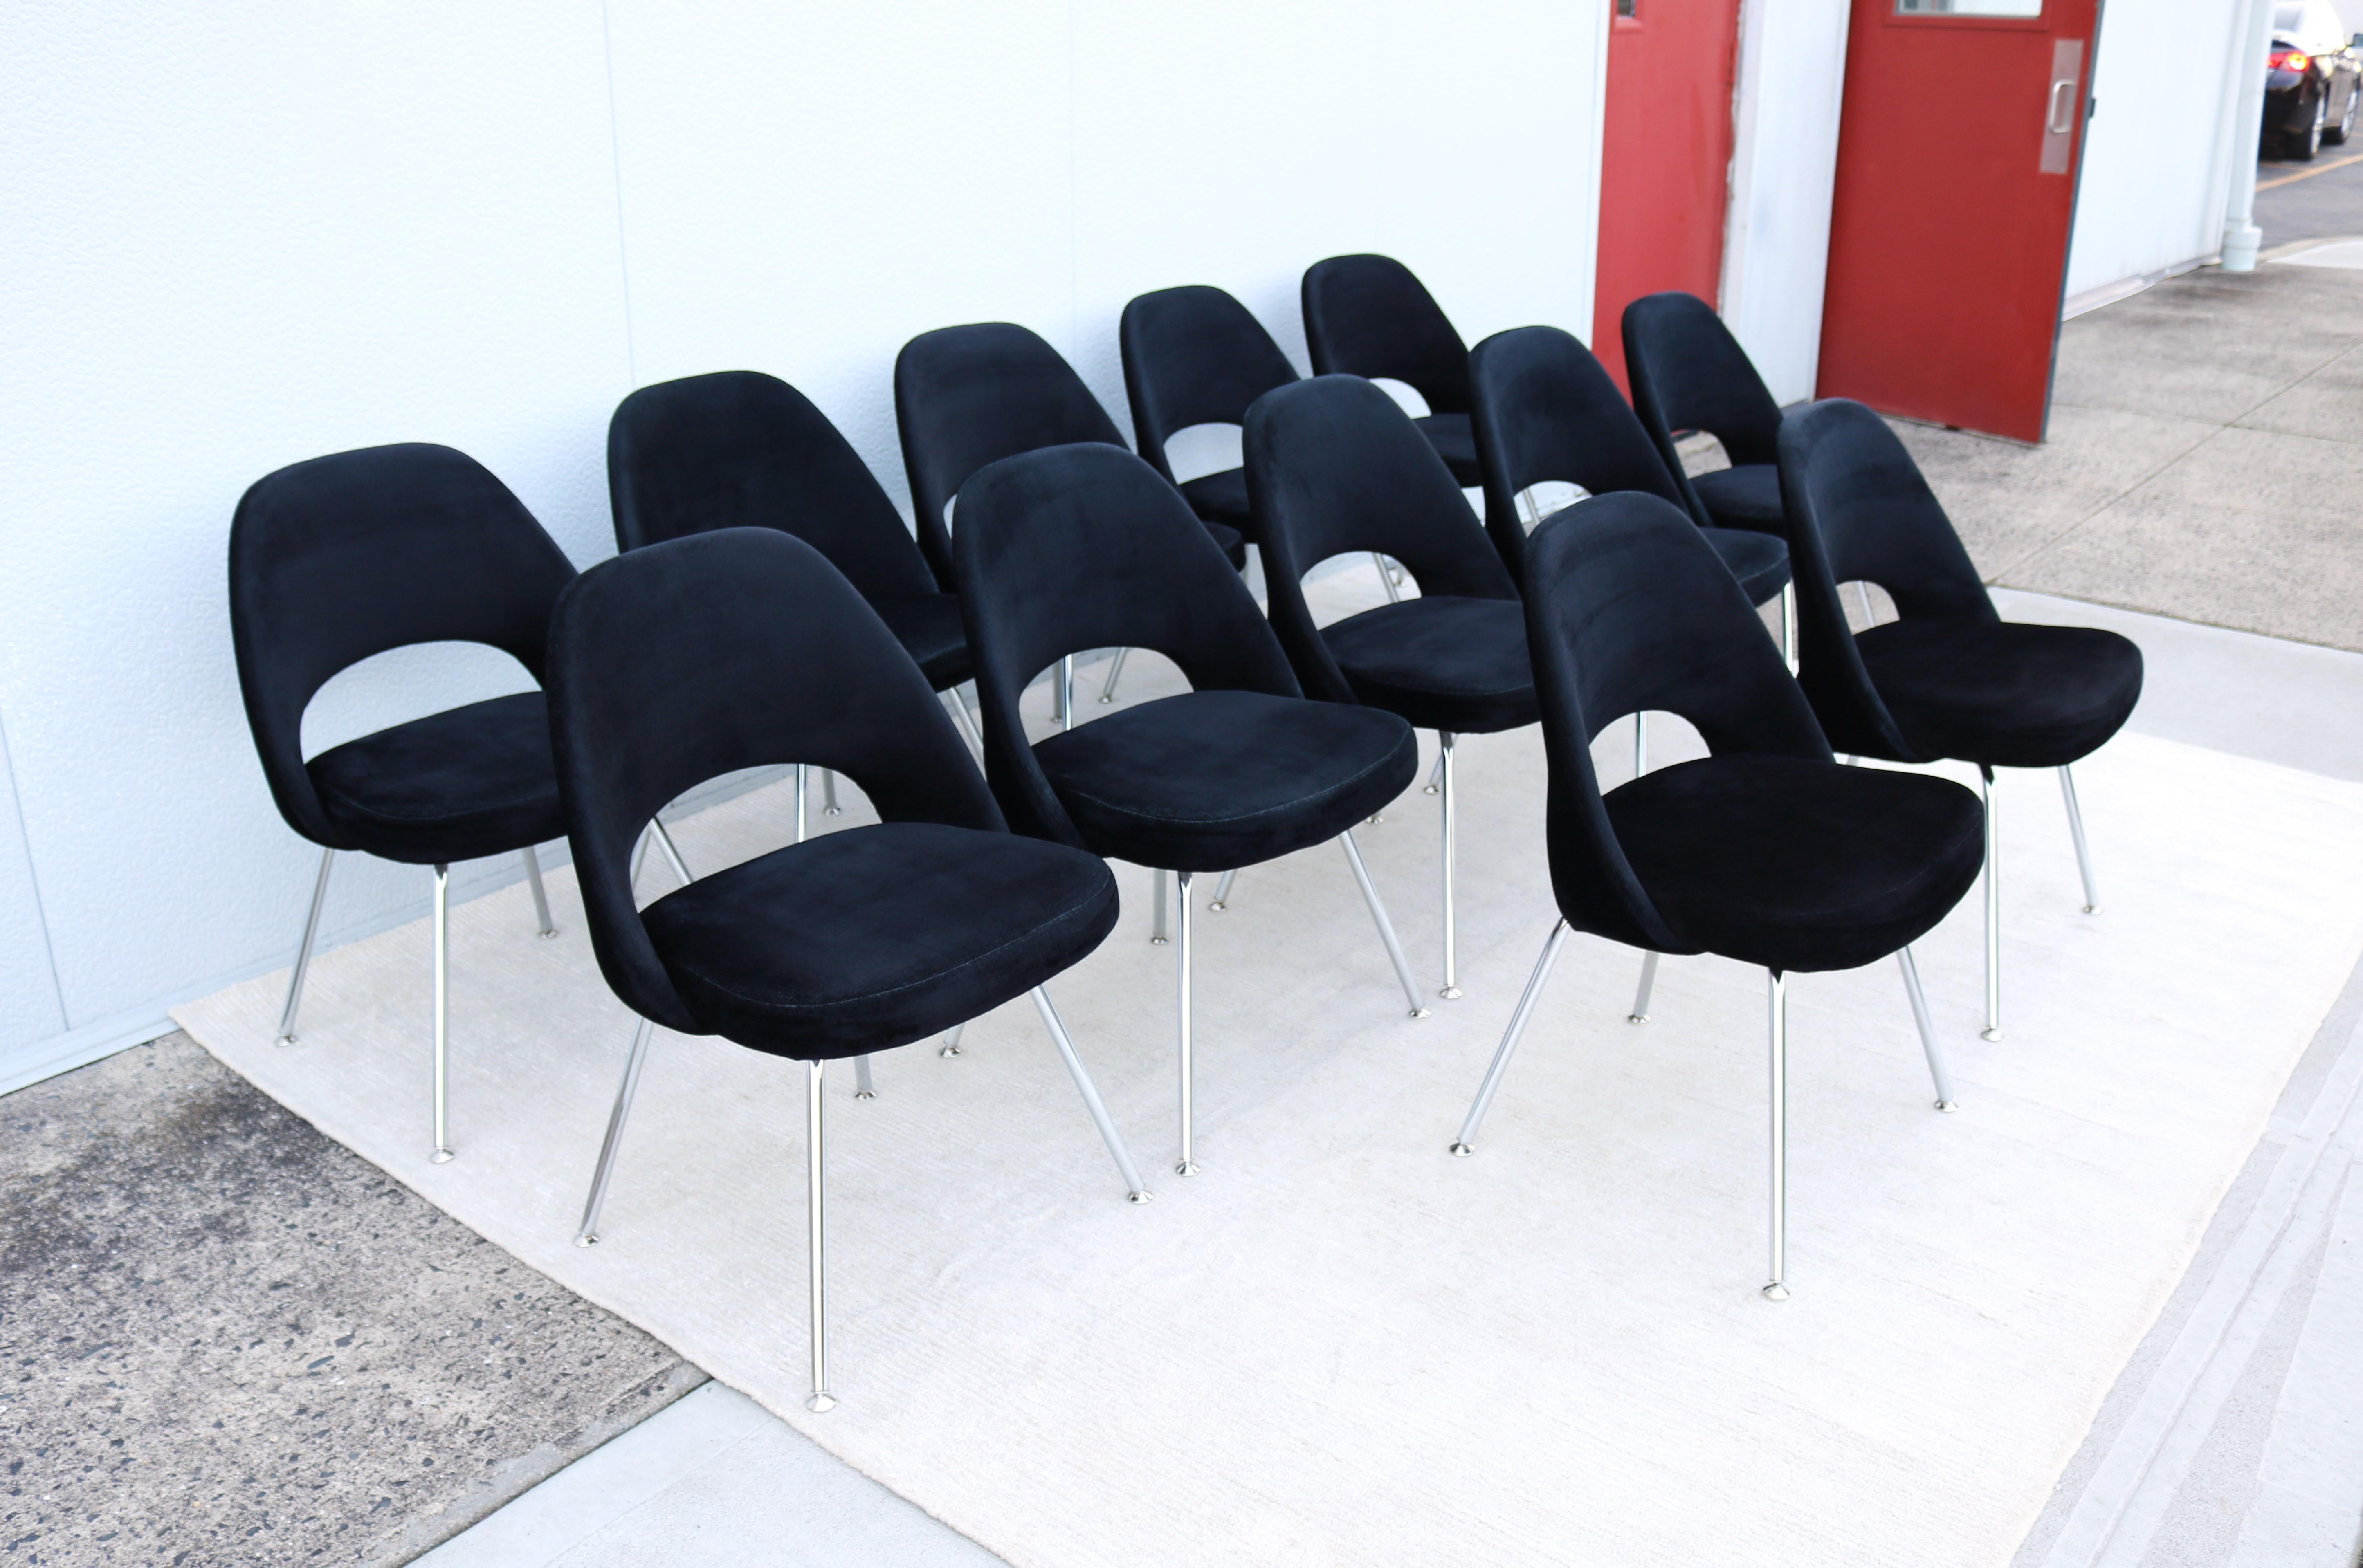 American Mid-Century Modern Eero Saarinen for Knoll Executive Armless Chairs - Set of 12 For Sale